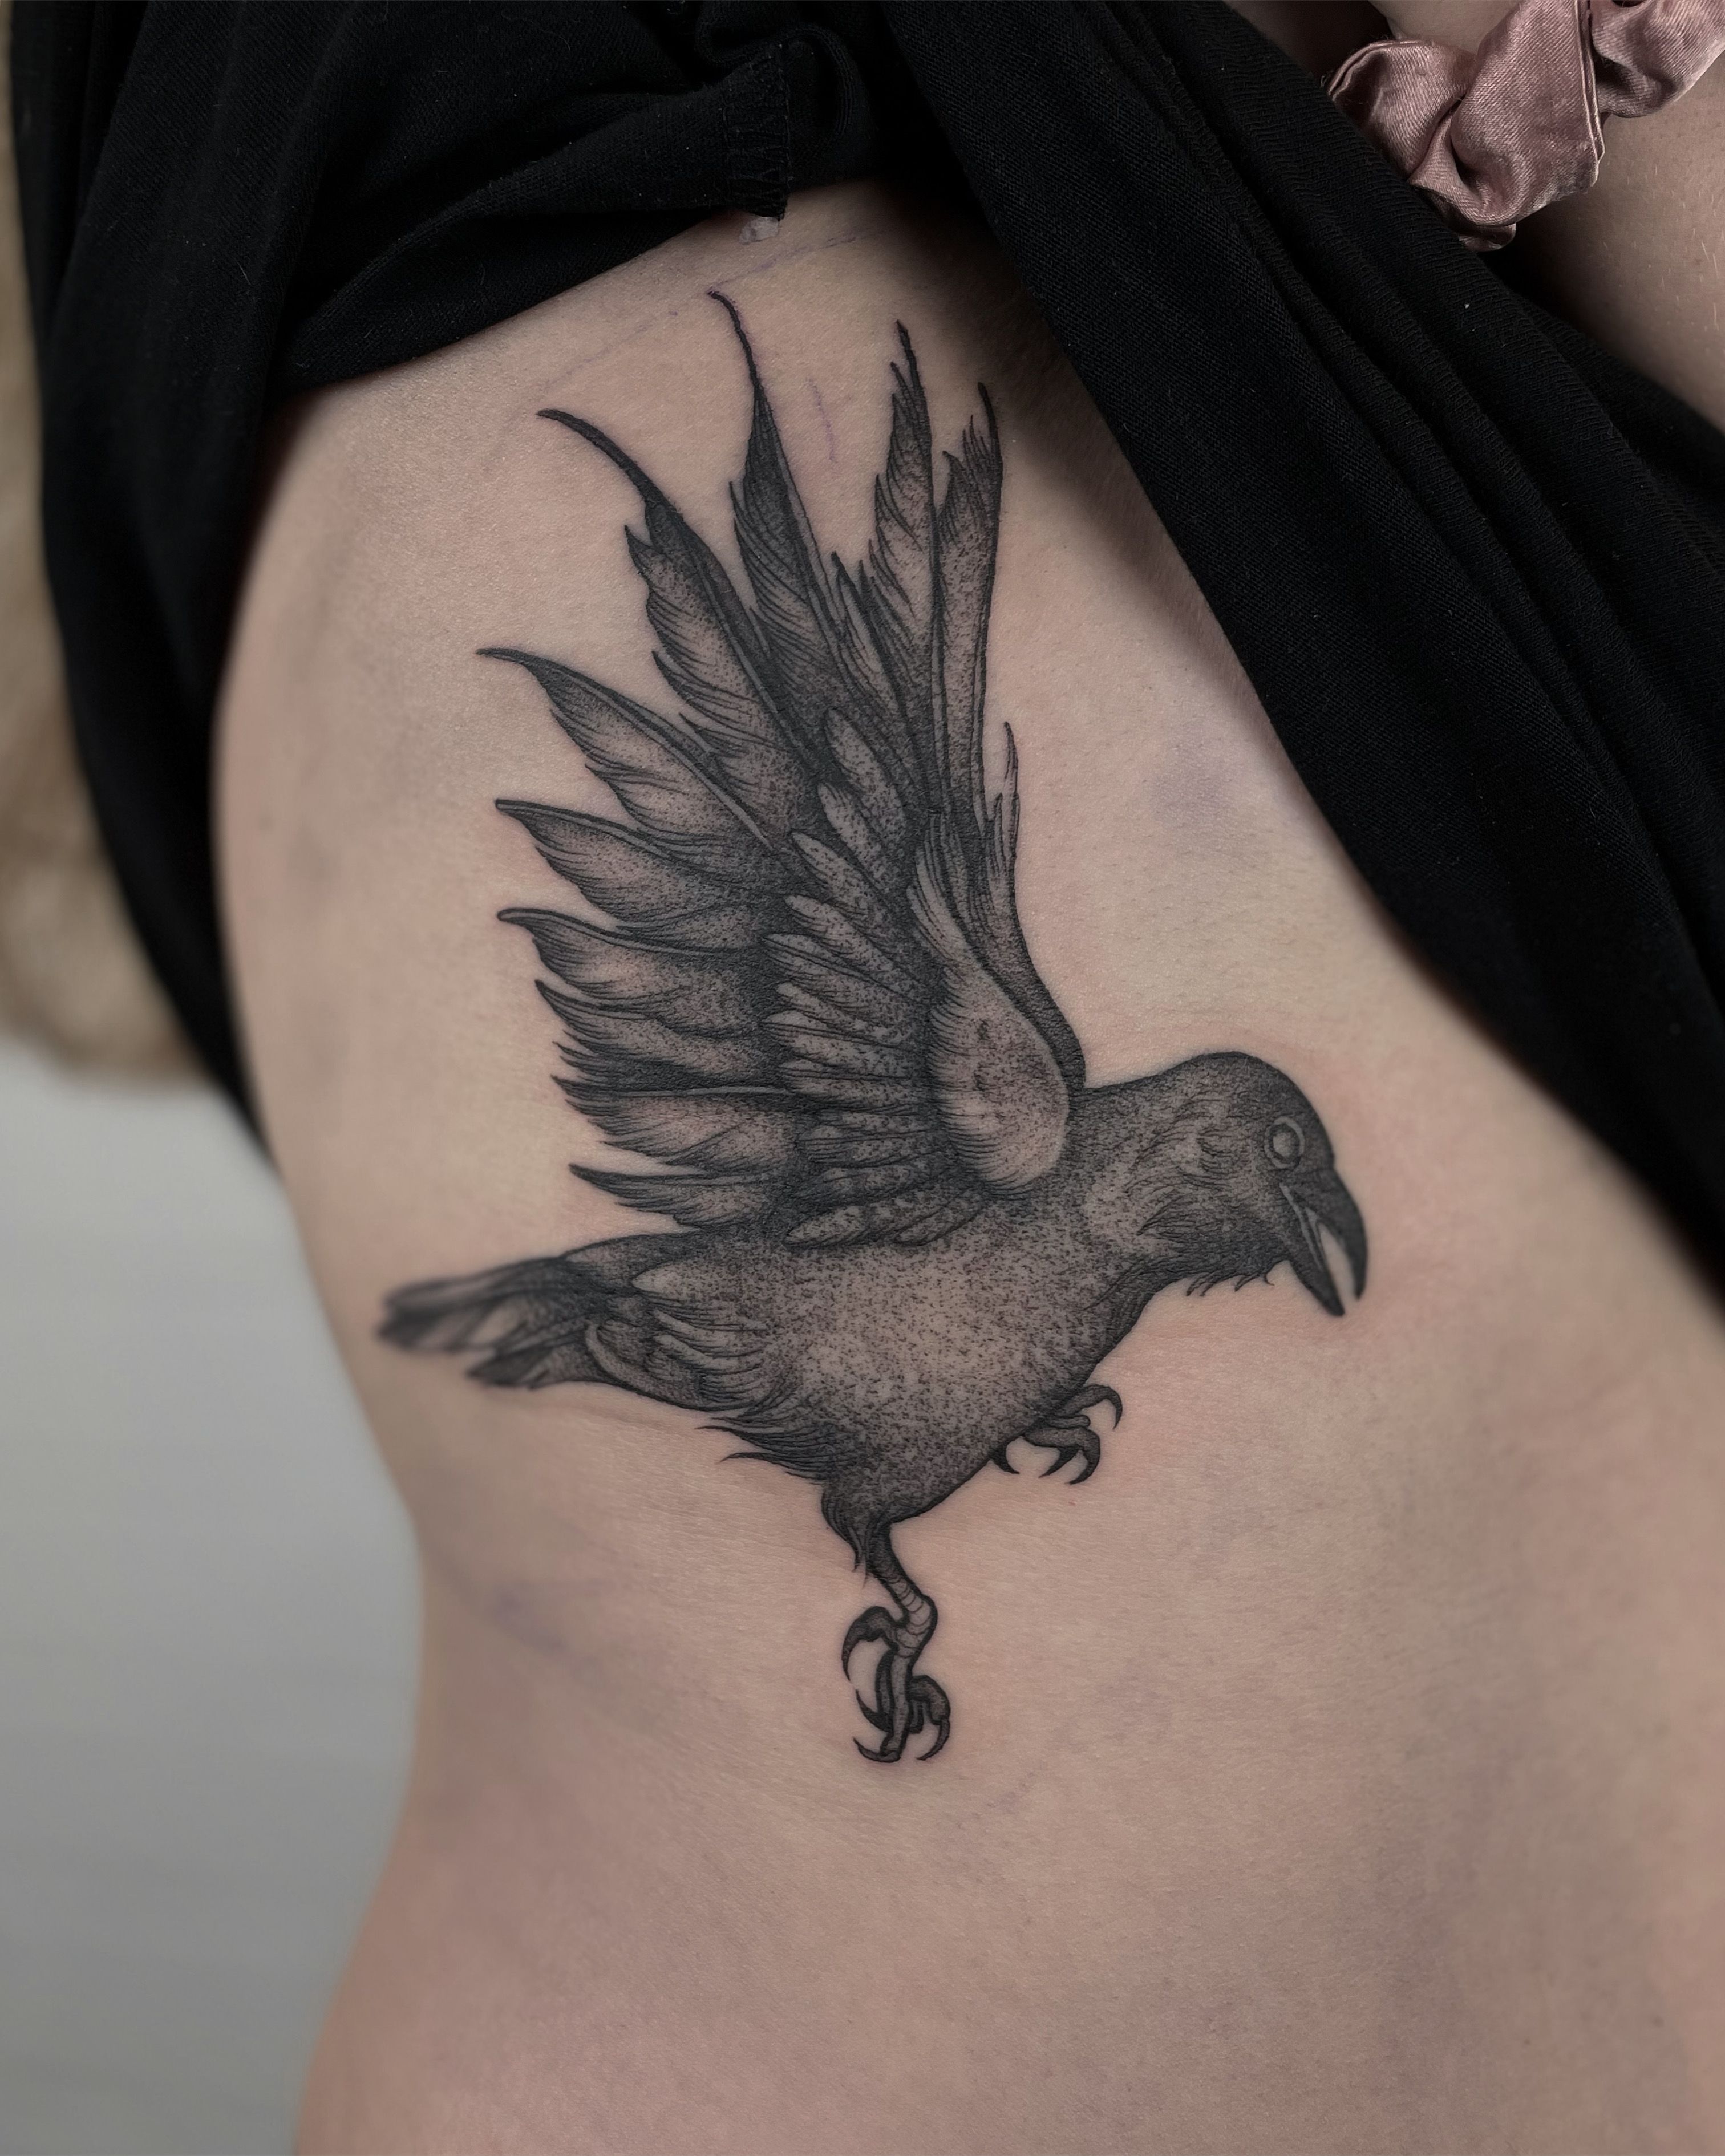 Crow Tattoo | Follow me on Twitter | aly ♥·····▽ | Flickr